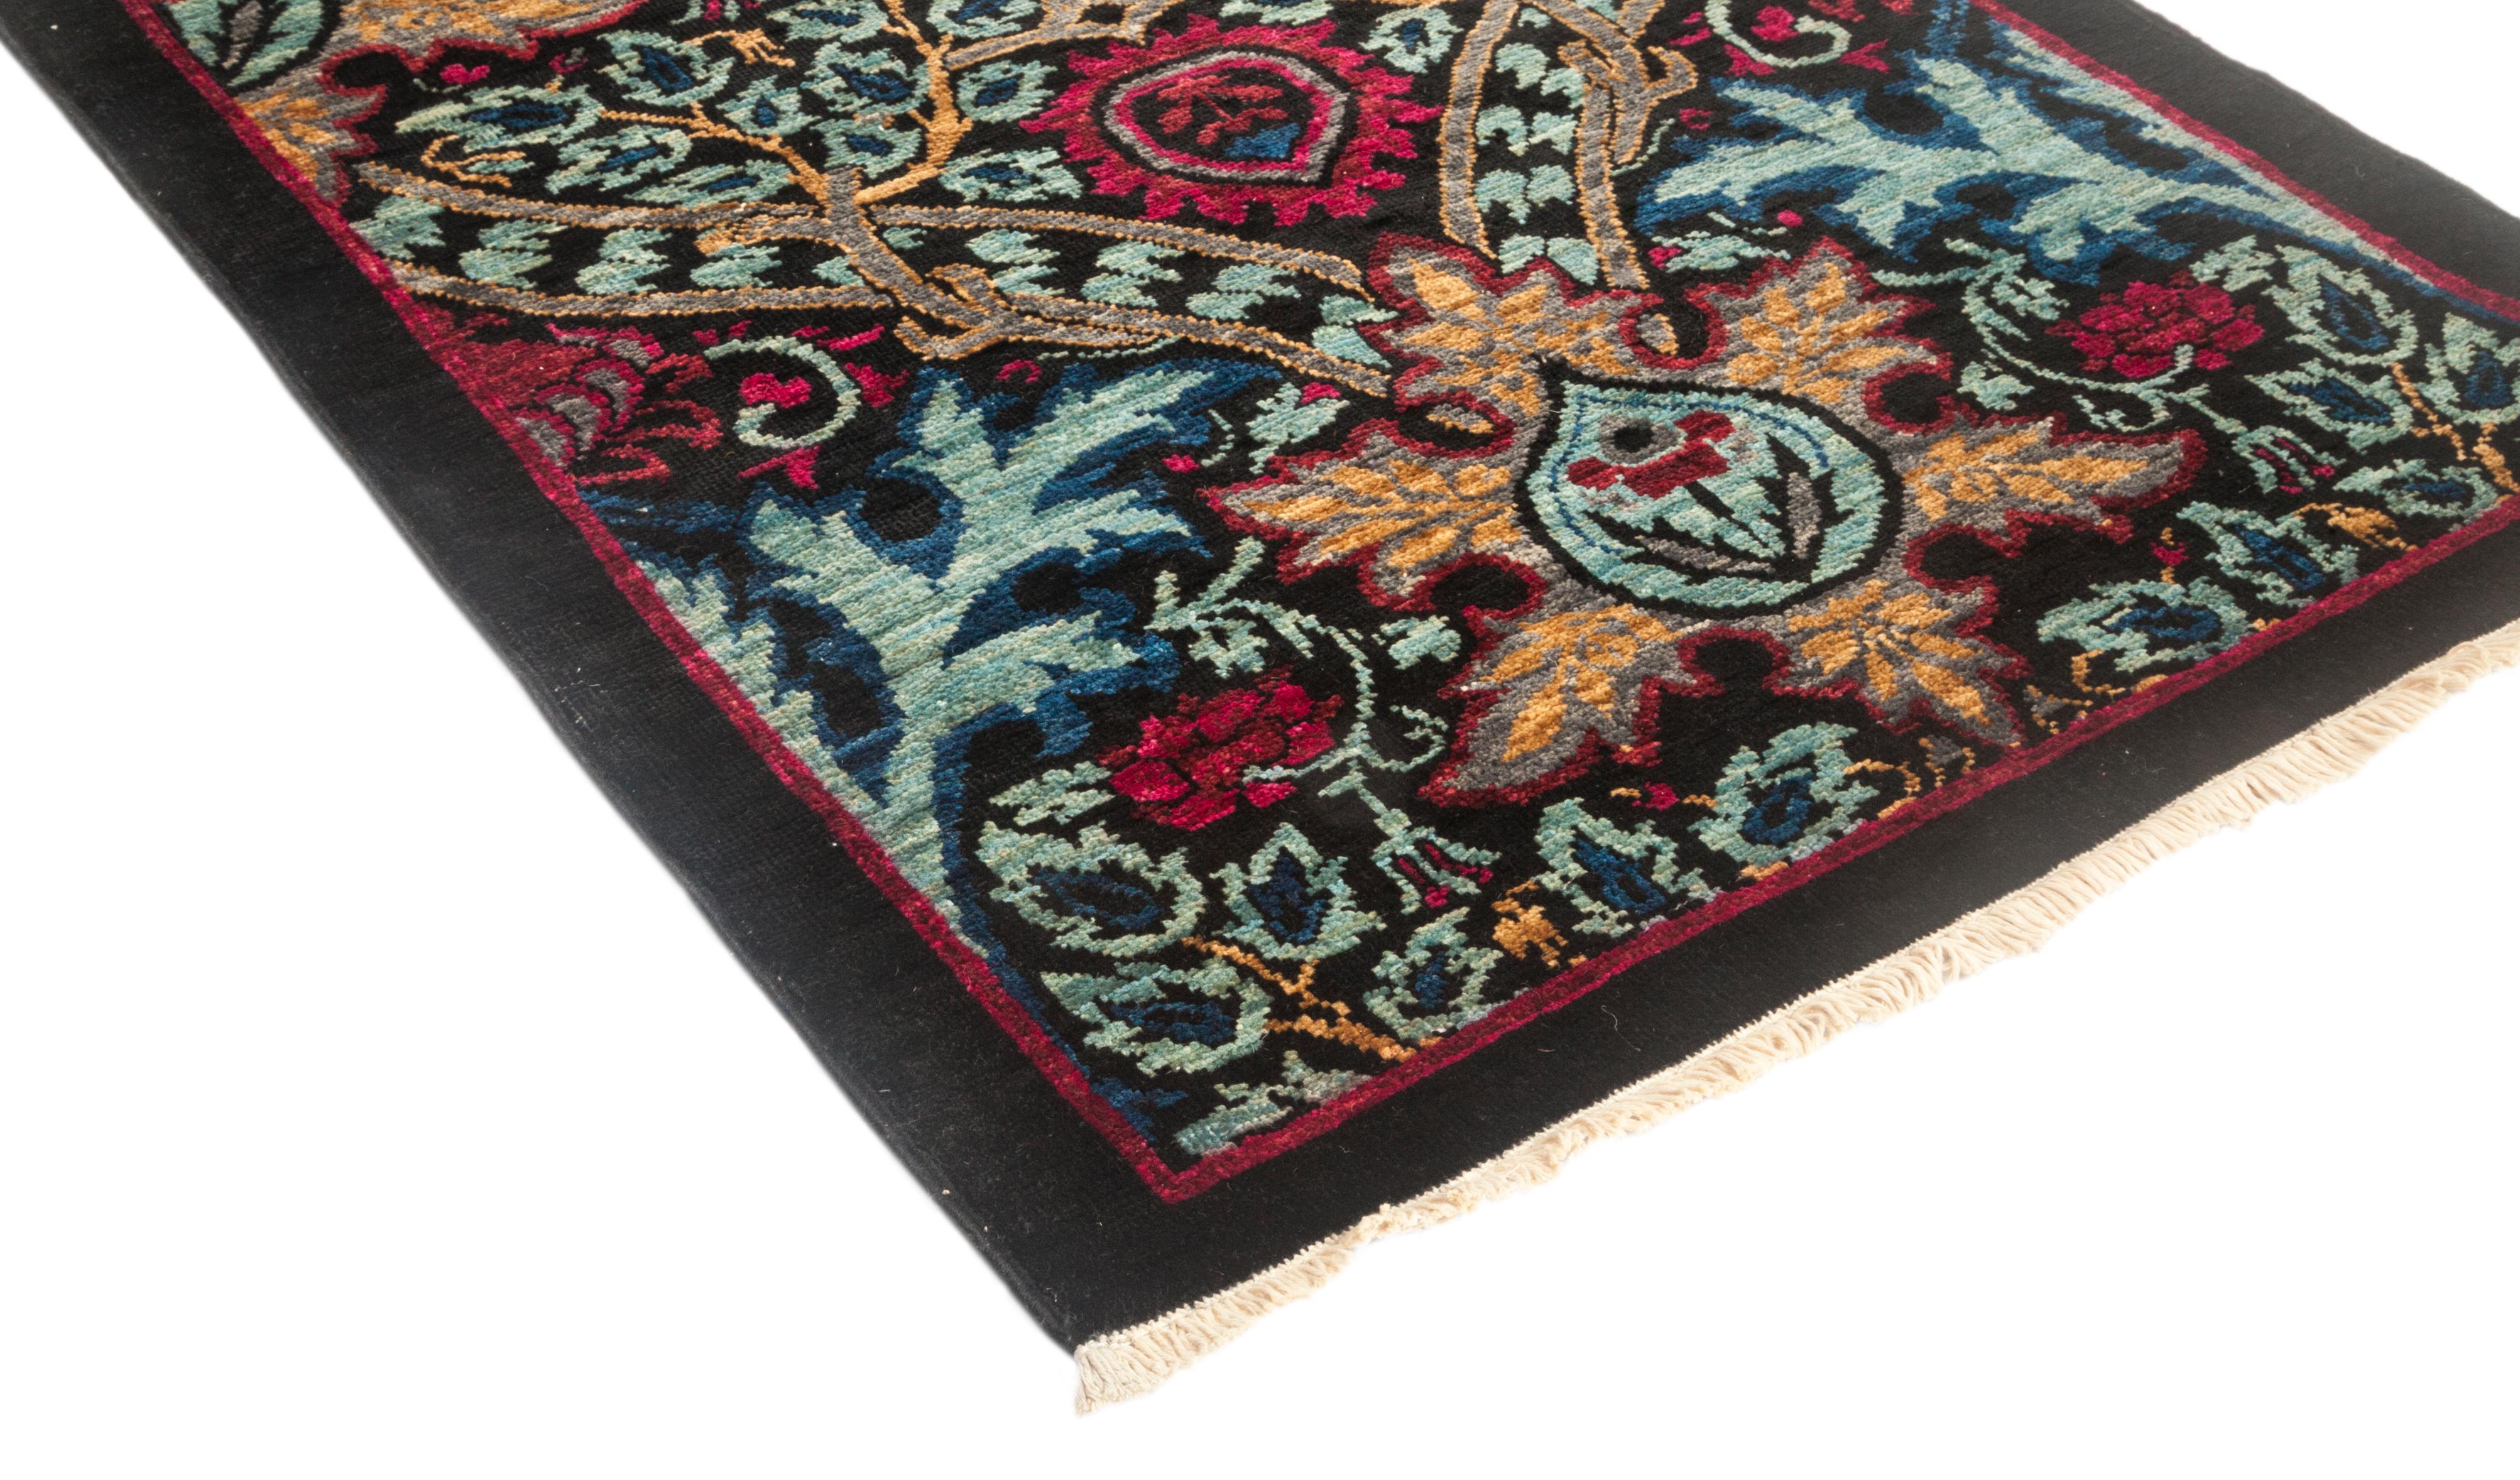 Color: Black - Made in: Pakistan. 100% wool. Whether boasting a field of flowers or ancient tribal symbols, patterned rugs are the easiest way to enrich a space. Subtle colors and intricate motifs reinforce the quiet sophistication of a traditional